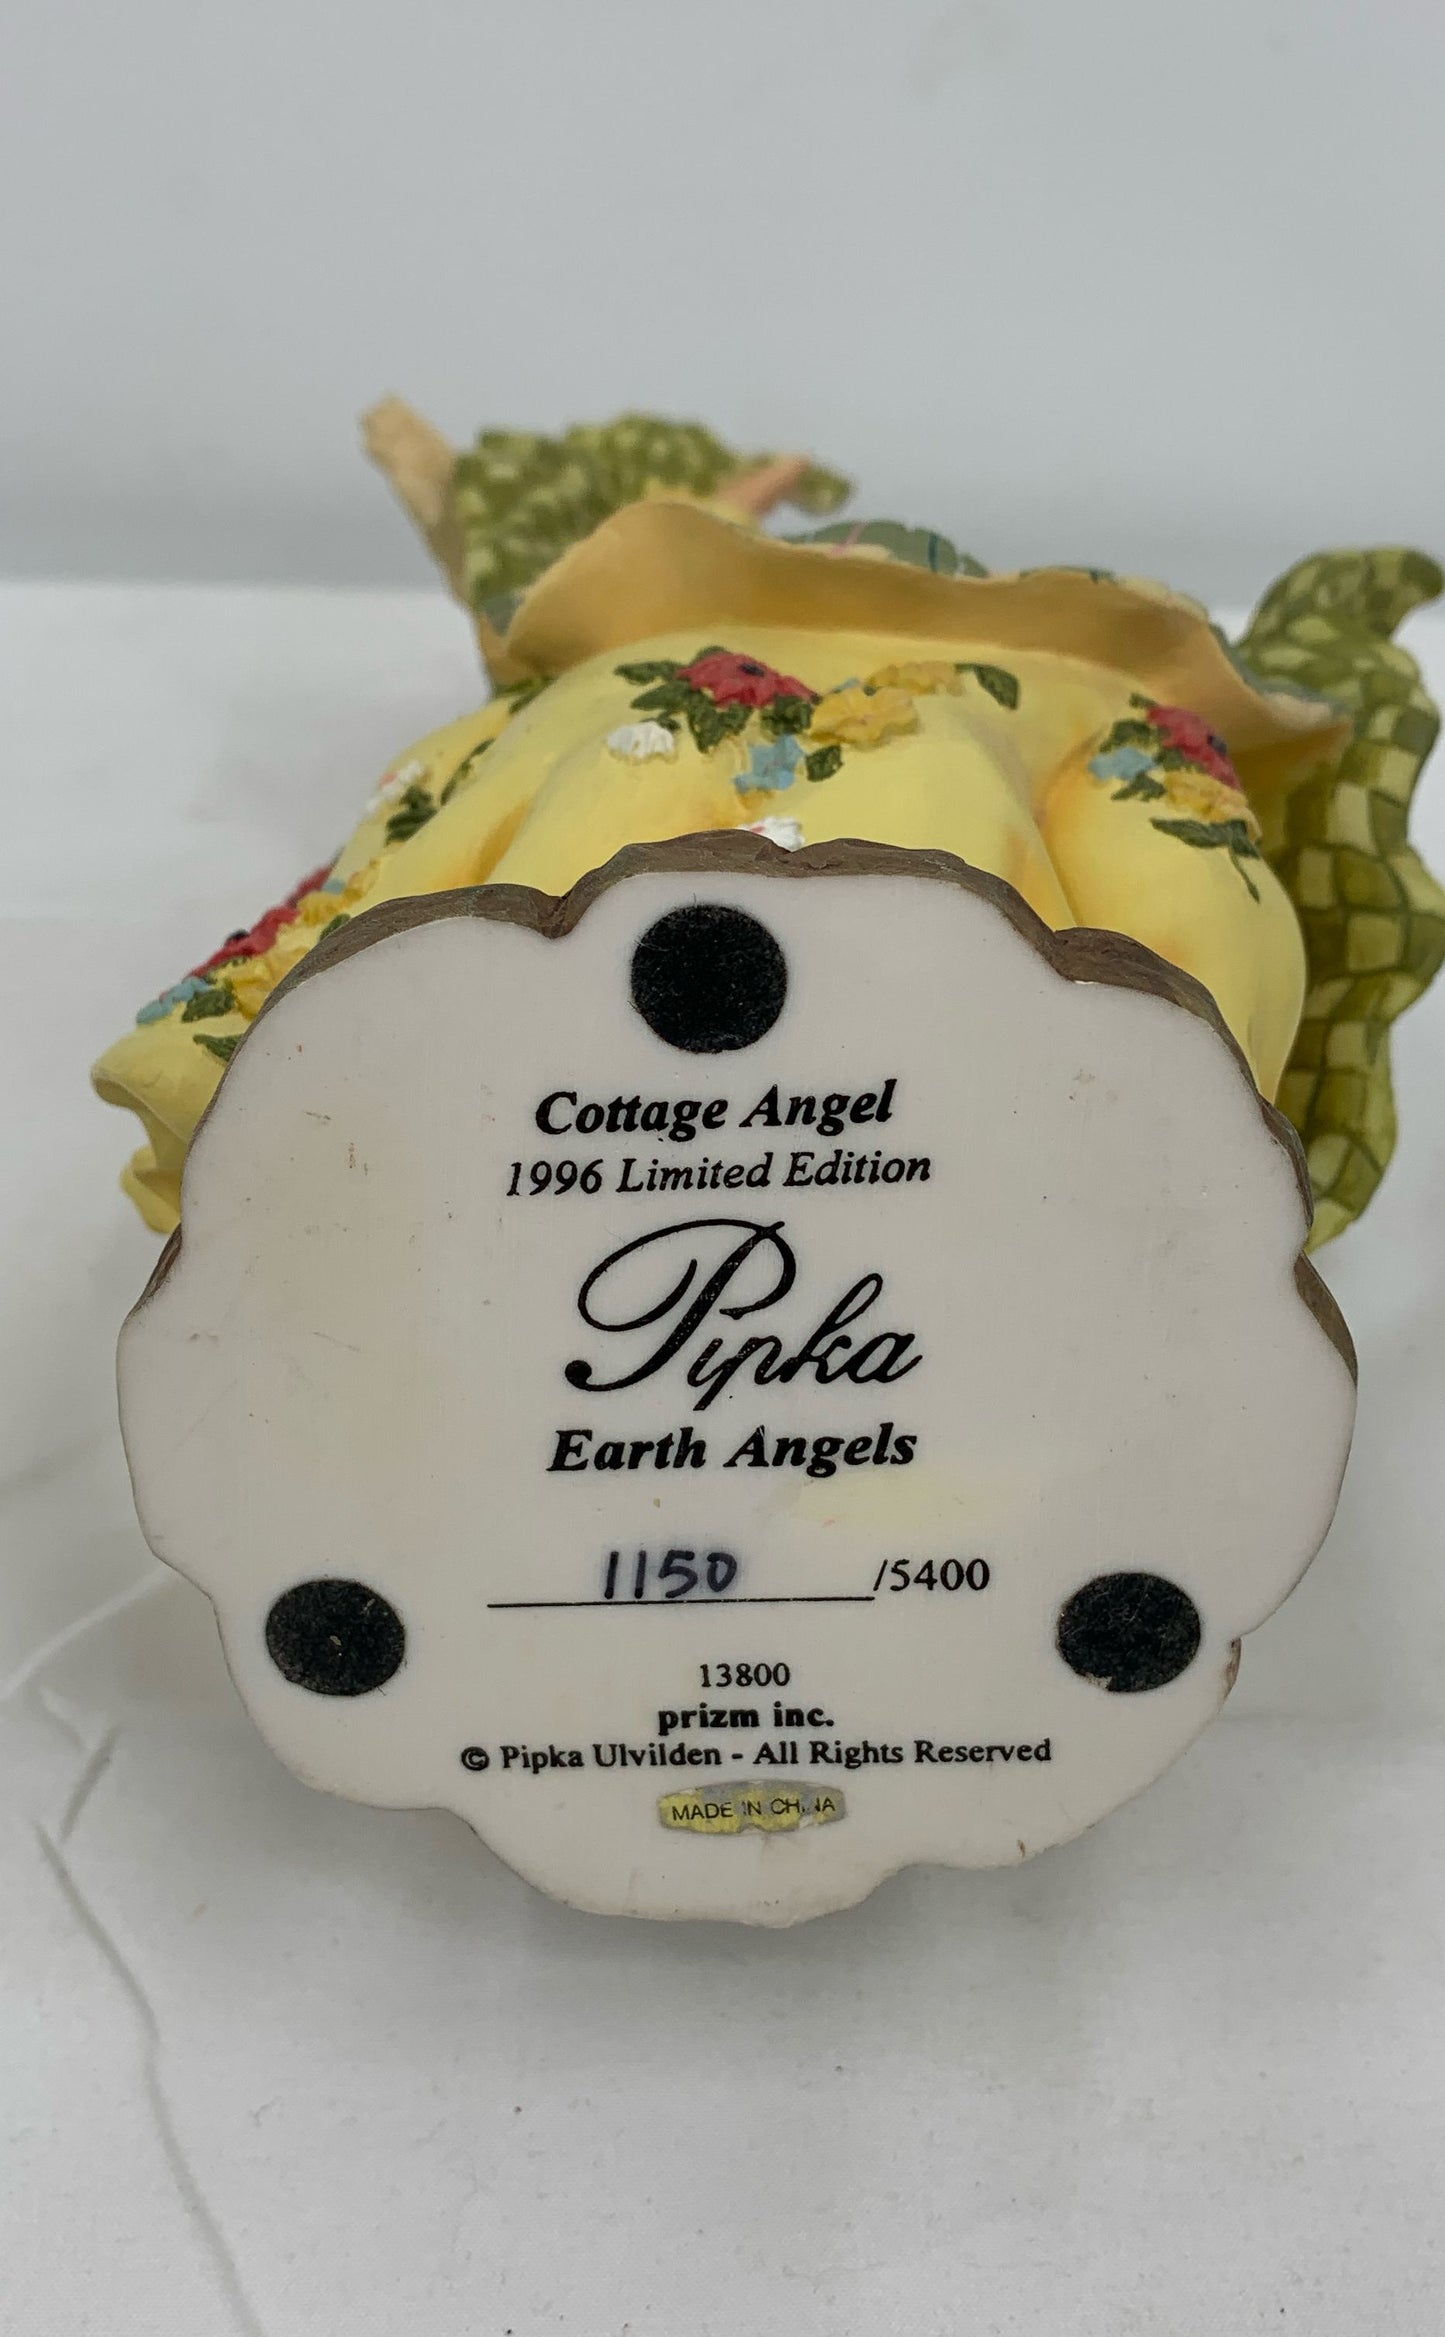 Prizm Pipka 1996 Limited Edition Earth Angels #13800 Cottage Angel 1150/5400